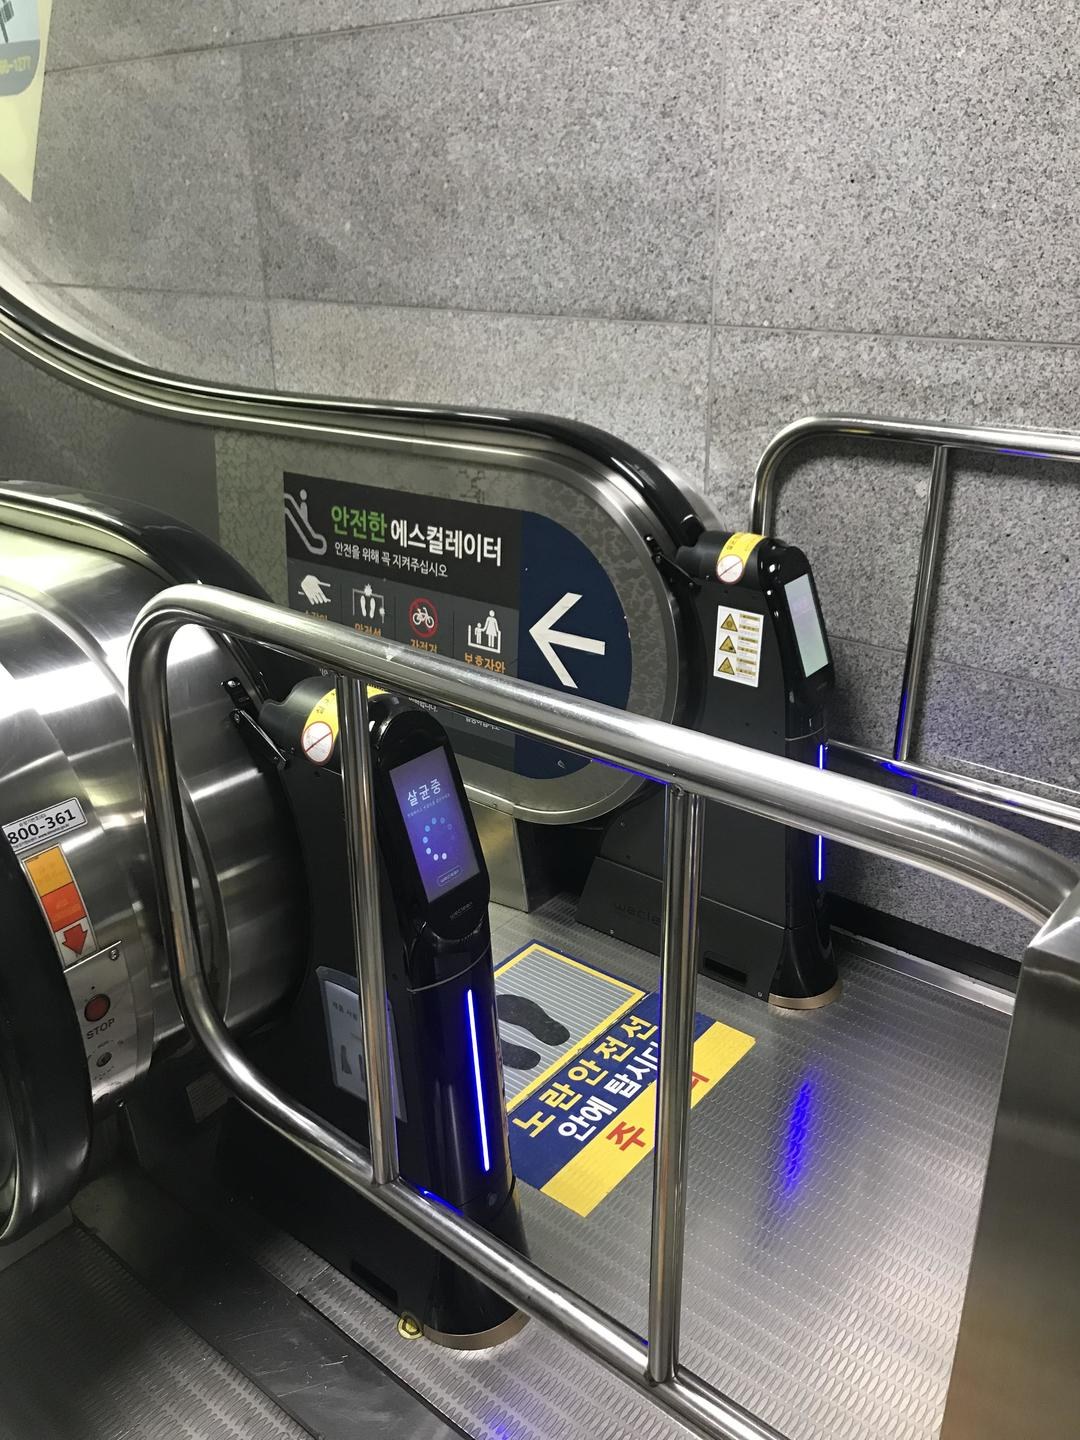 In 2022, introduce Weclean, an automatic sterilization and vacuum cleaner for escalator handles, at Sangin Station, a pilot station to respond to COVID-19 in Daegu subway 1